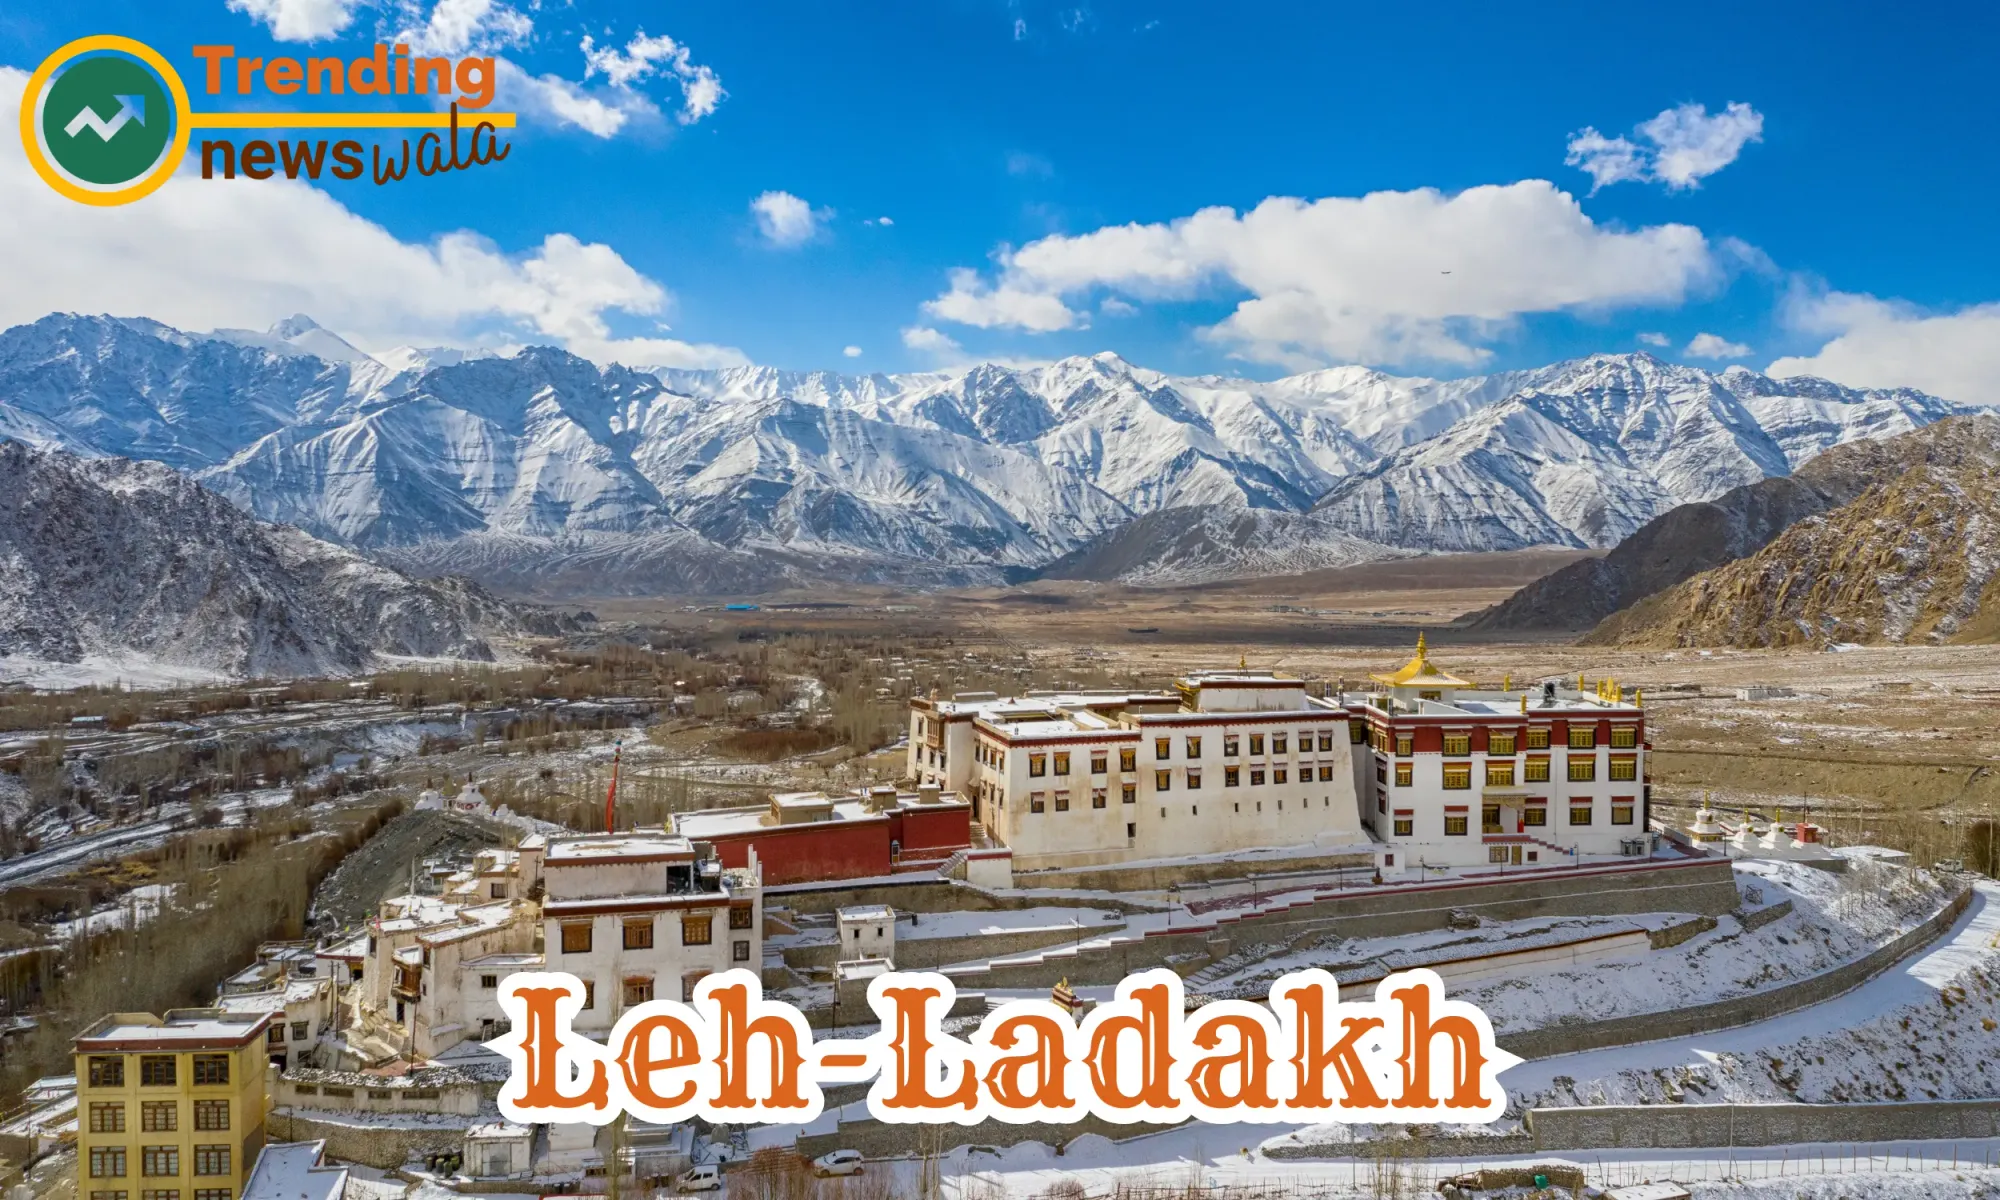 Leh-Ladakh is a region in the northern part of the Indian subcontinent